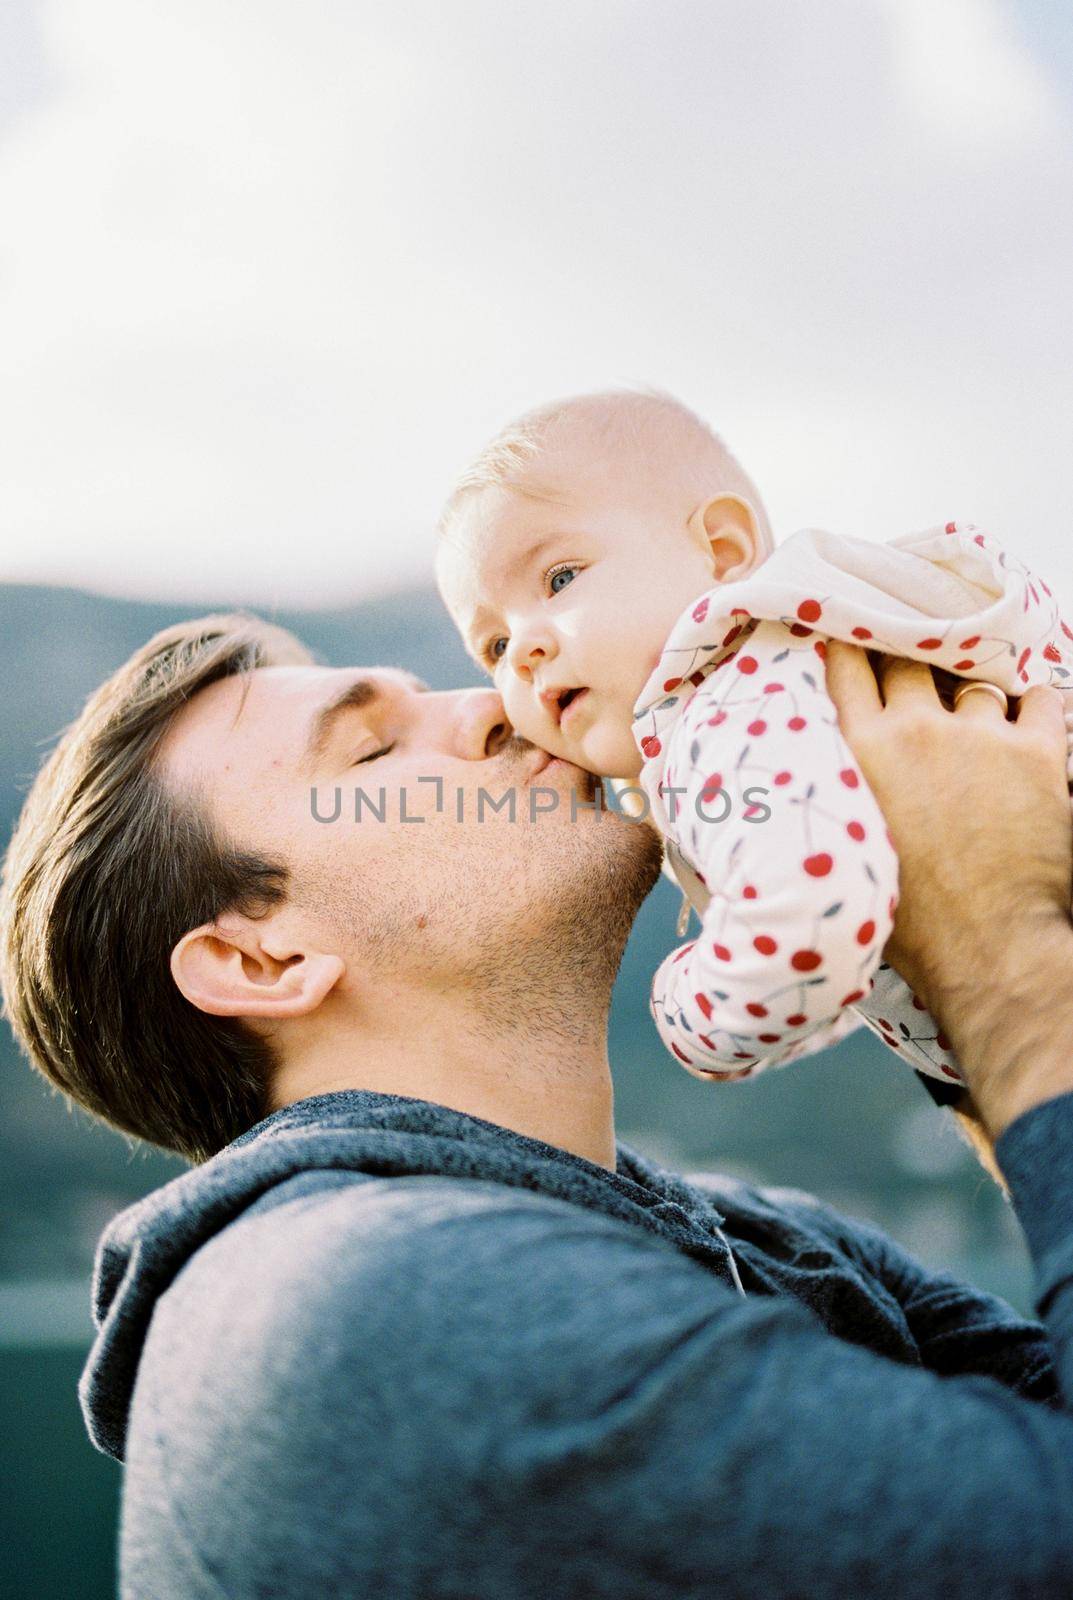 Dad lifts the baby above his head and kisses him on the cheek. Portrait by Nadtochiy